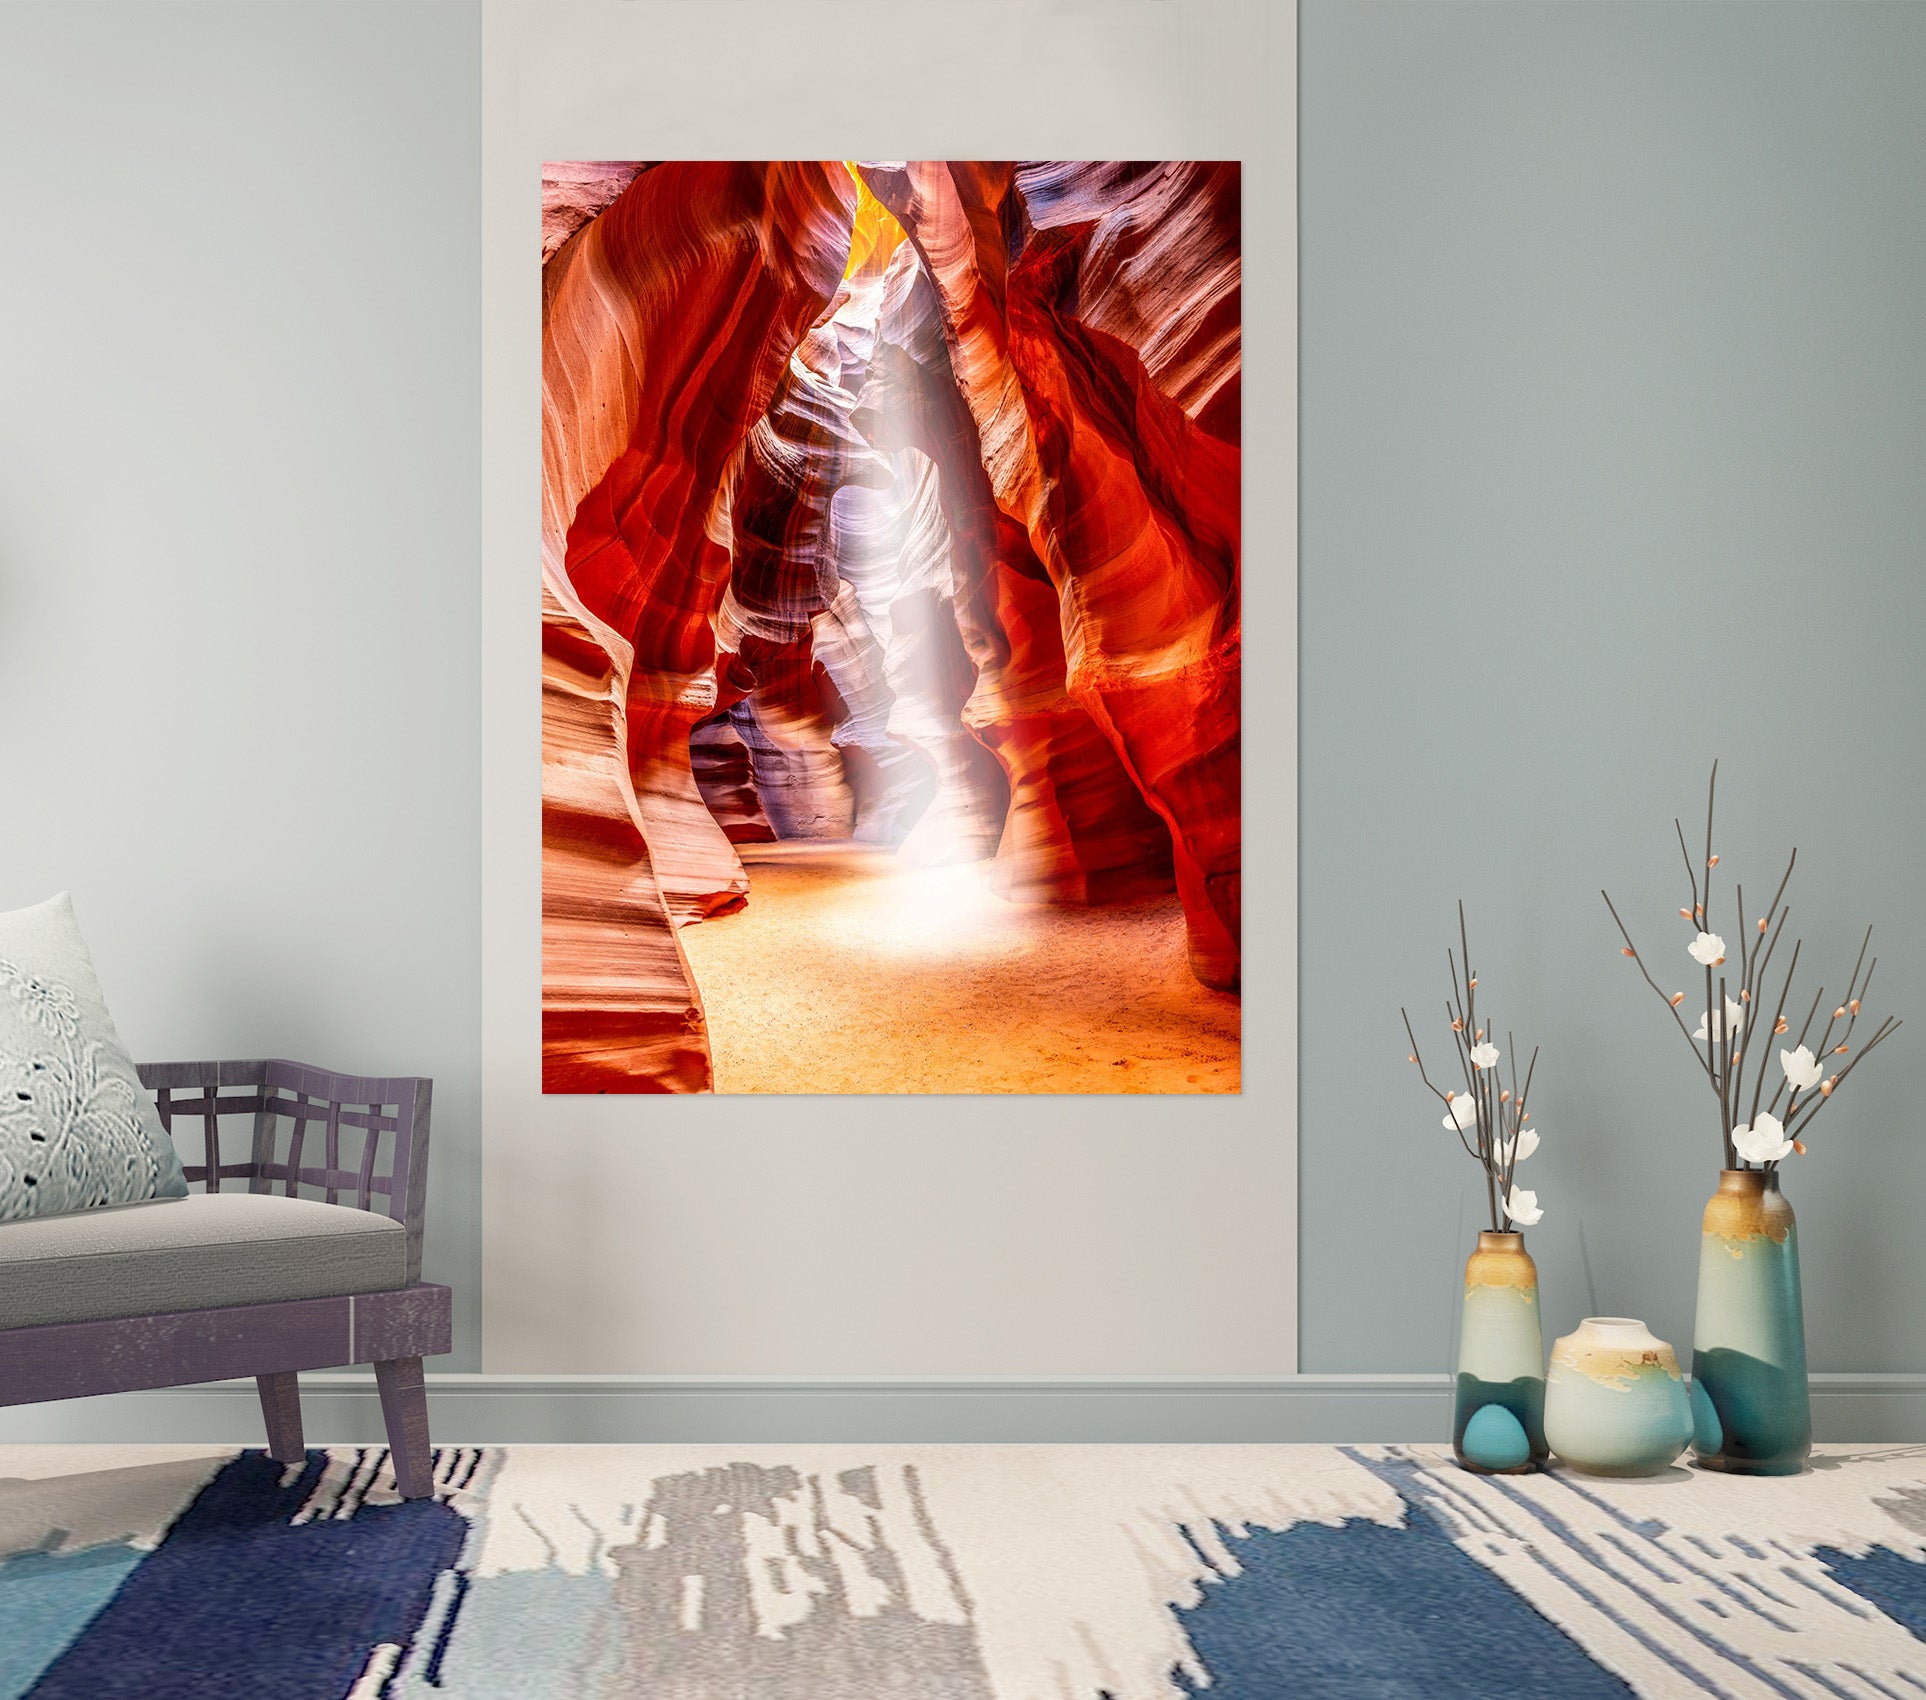 3D Red Canyon 236 Marco Carmassi Wall Sticker